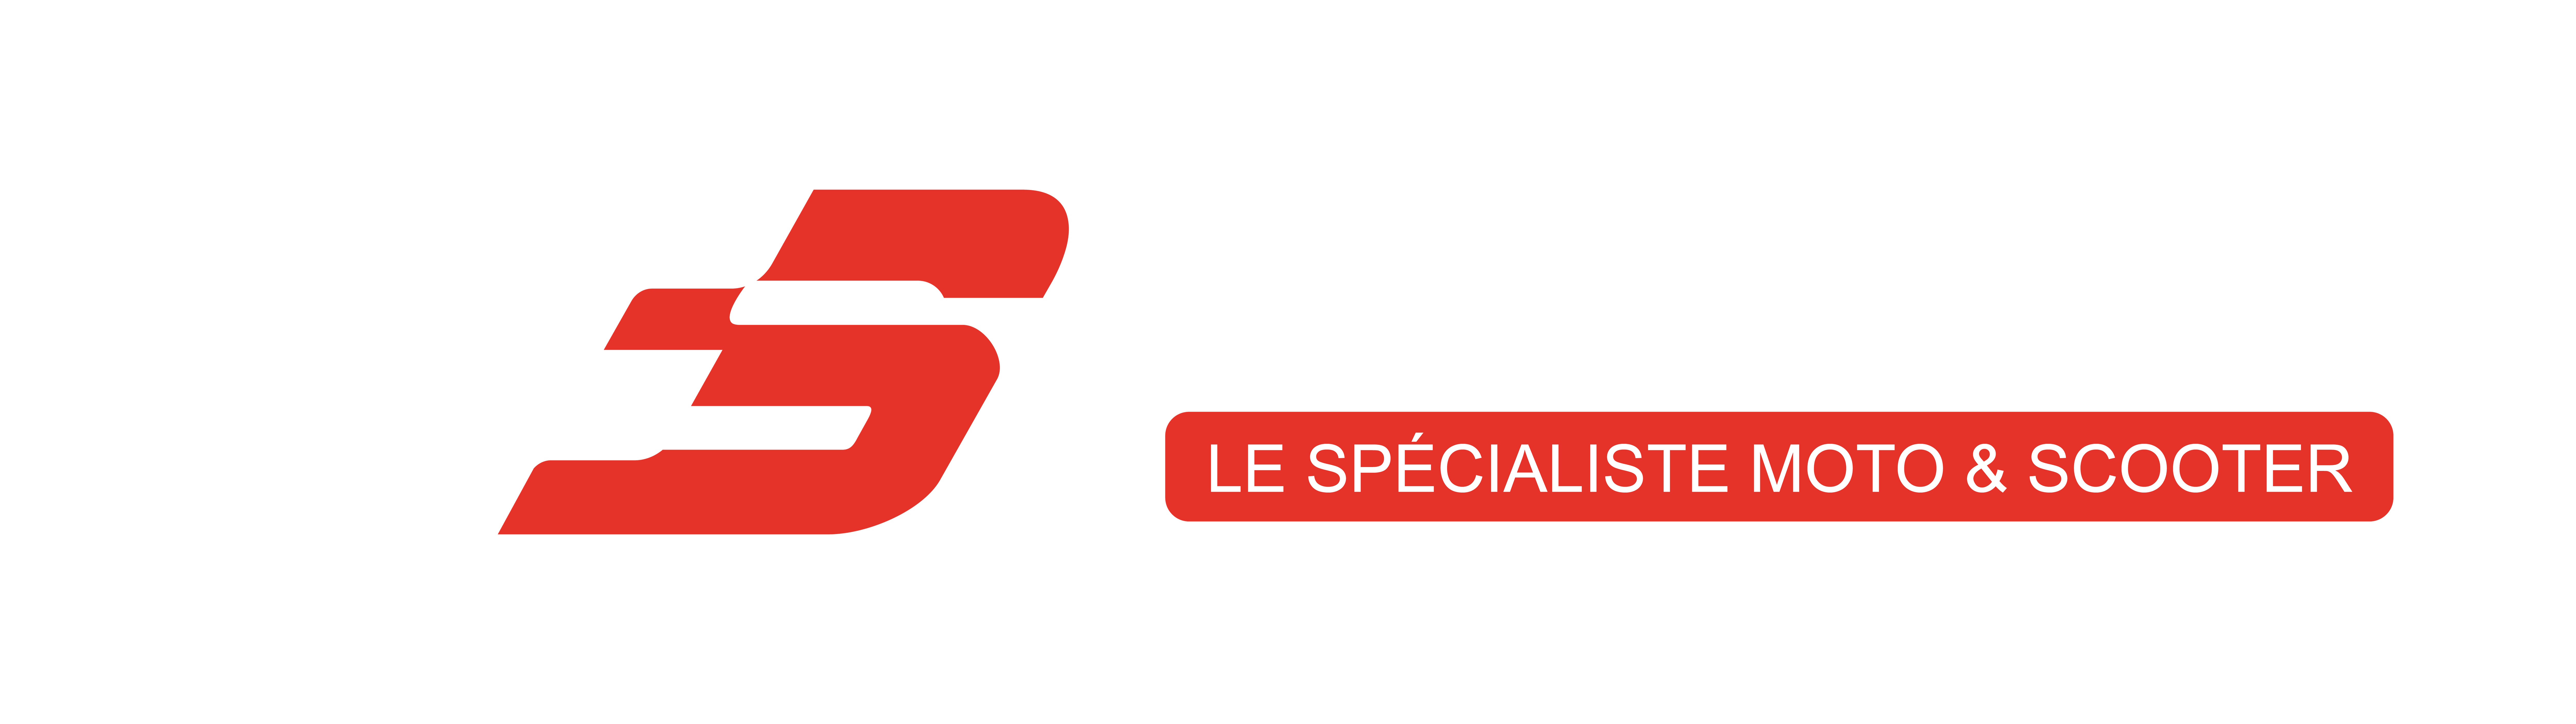 Scoots83